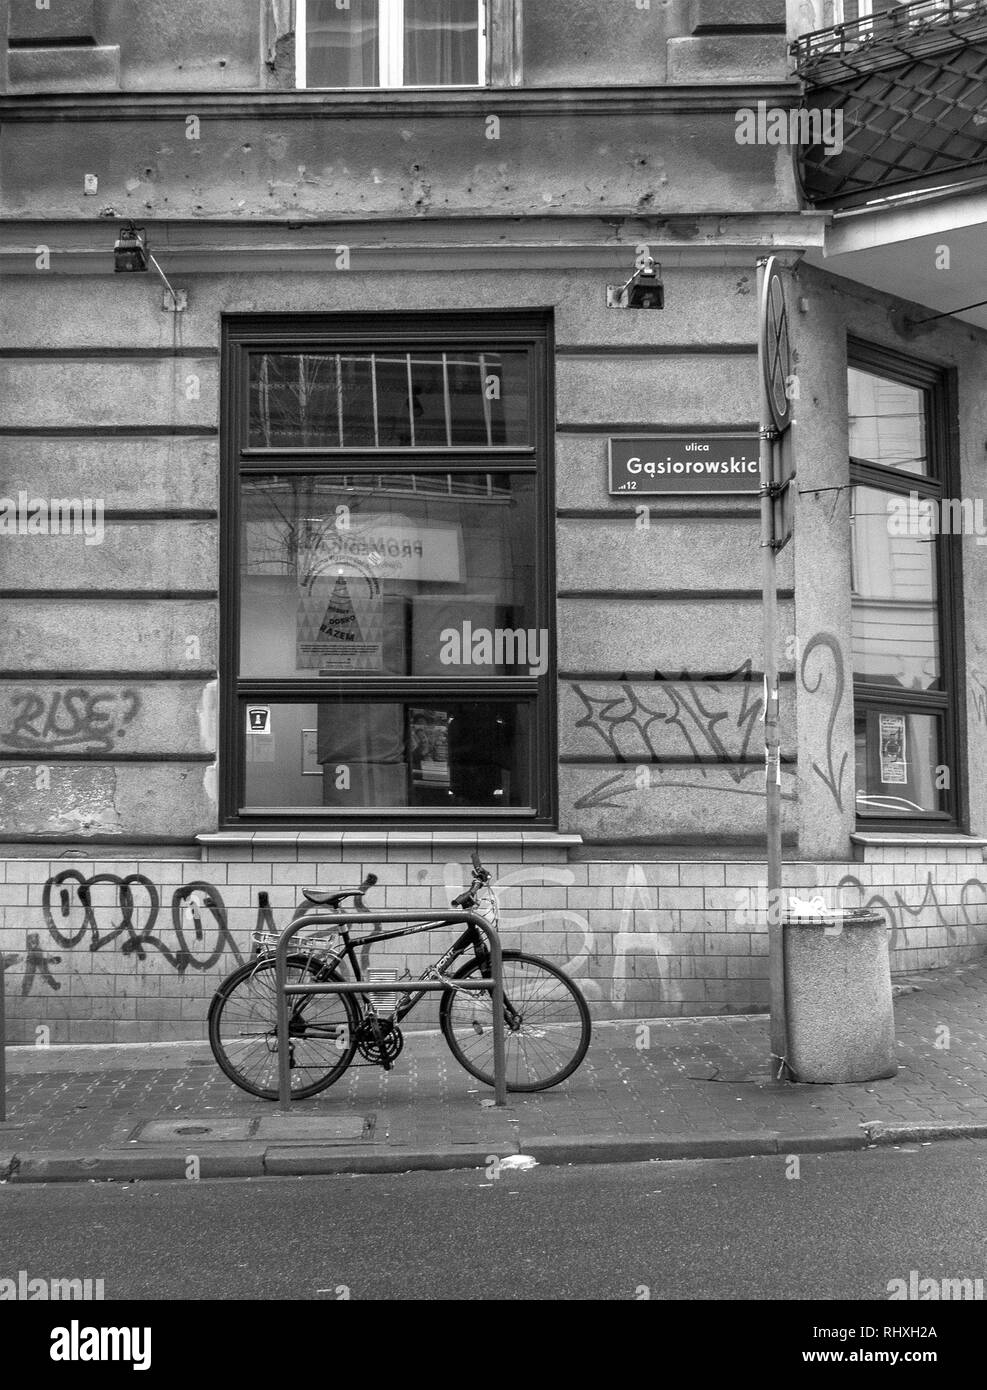 POZAN, POLAND- FEBRUARY 3rd 2019: A black and white photograph of a bike in an urban area Stock Photo